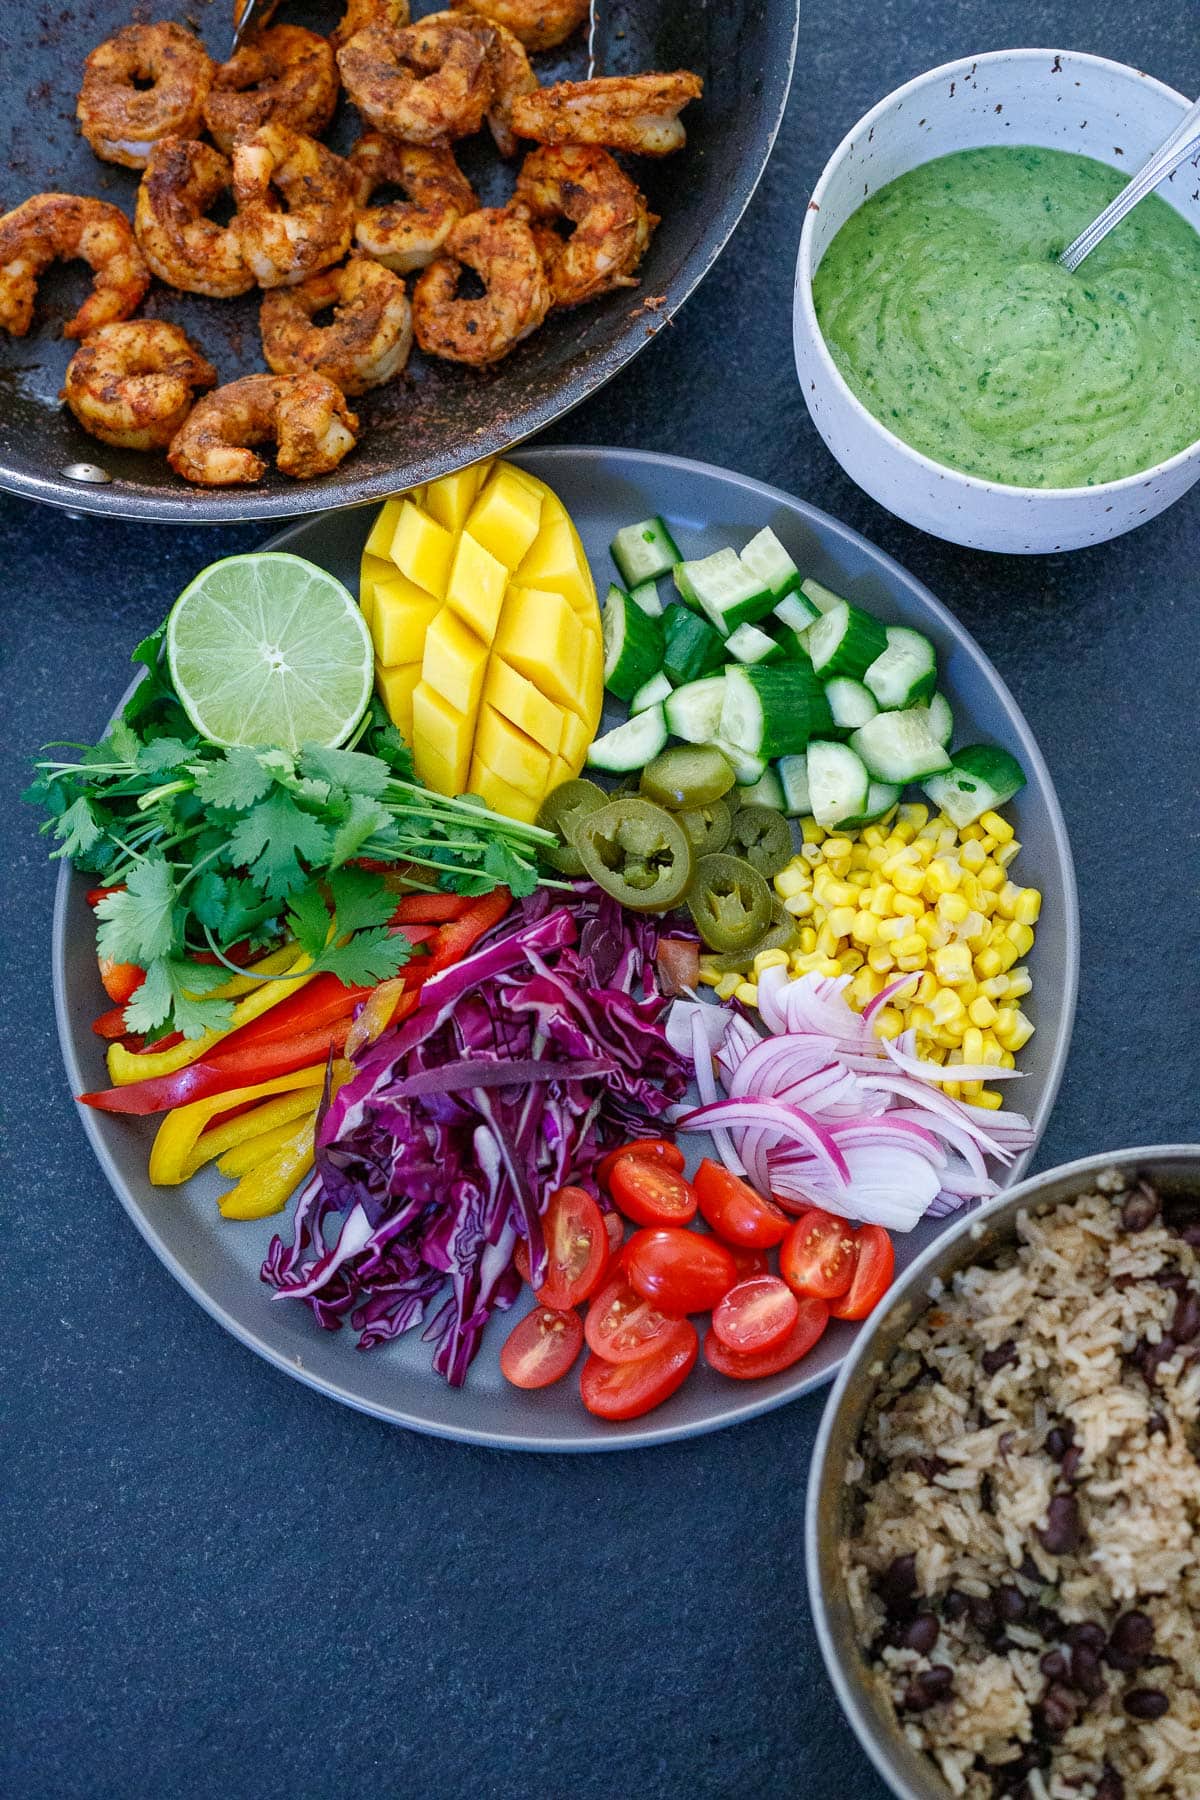 ingredients for spicy mexican shrimp and rice bowls - skillet with shrimp, creamy avocado sauce, plate with chopped and sliced veggies, mango, and herbs, and pot with rice and beans. 